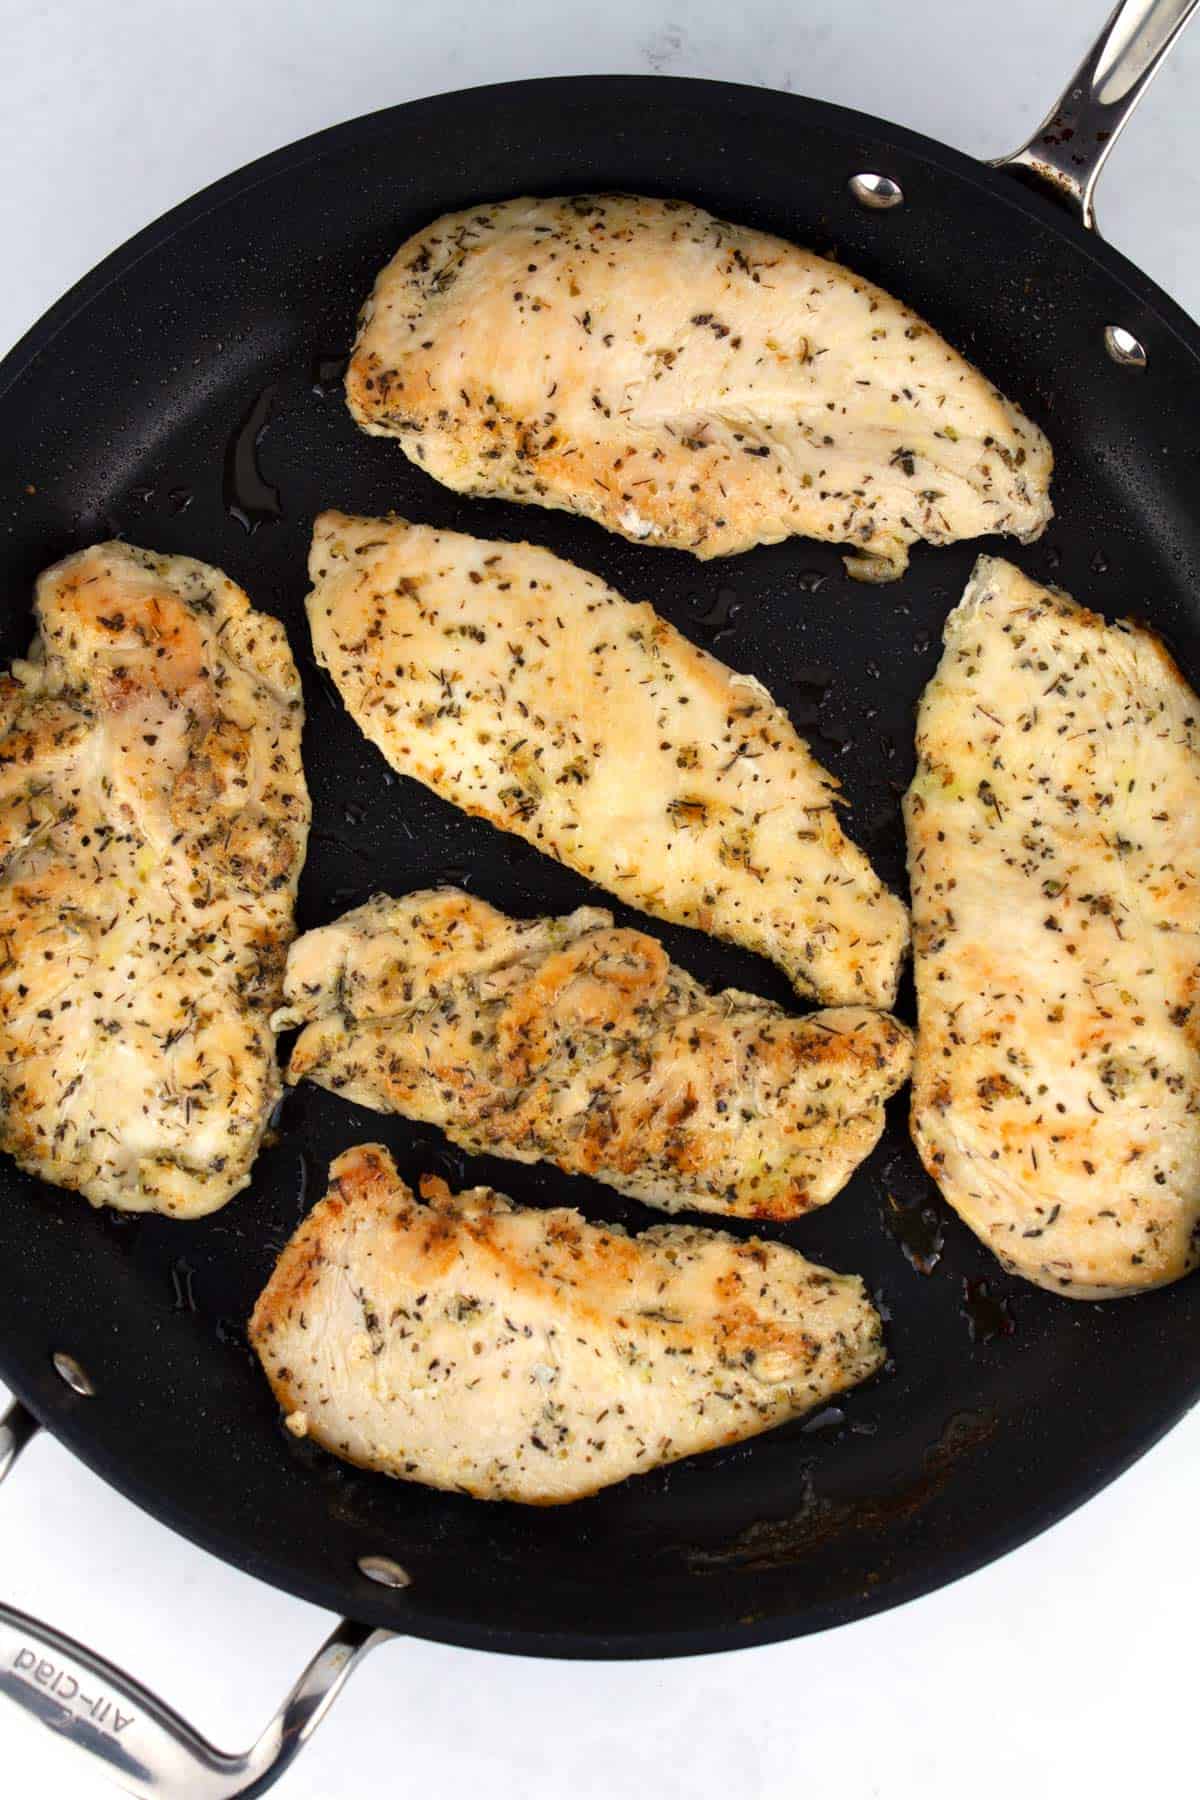 Six pieces of chicken seared in a black skillet.